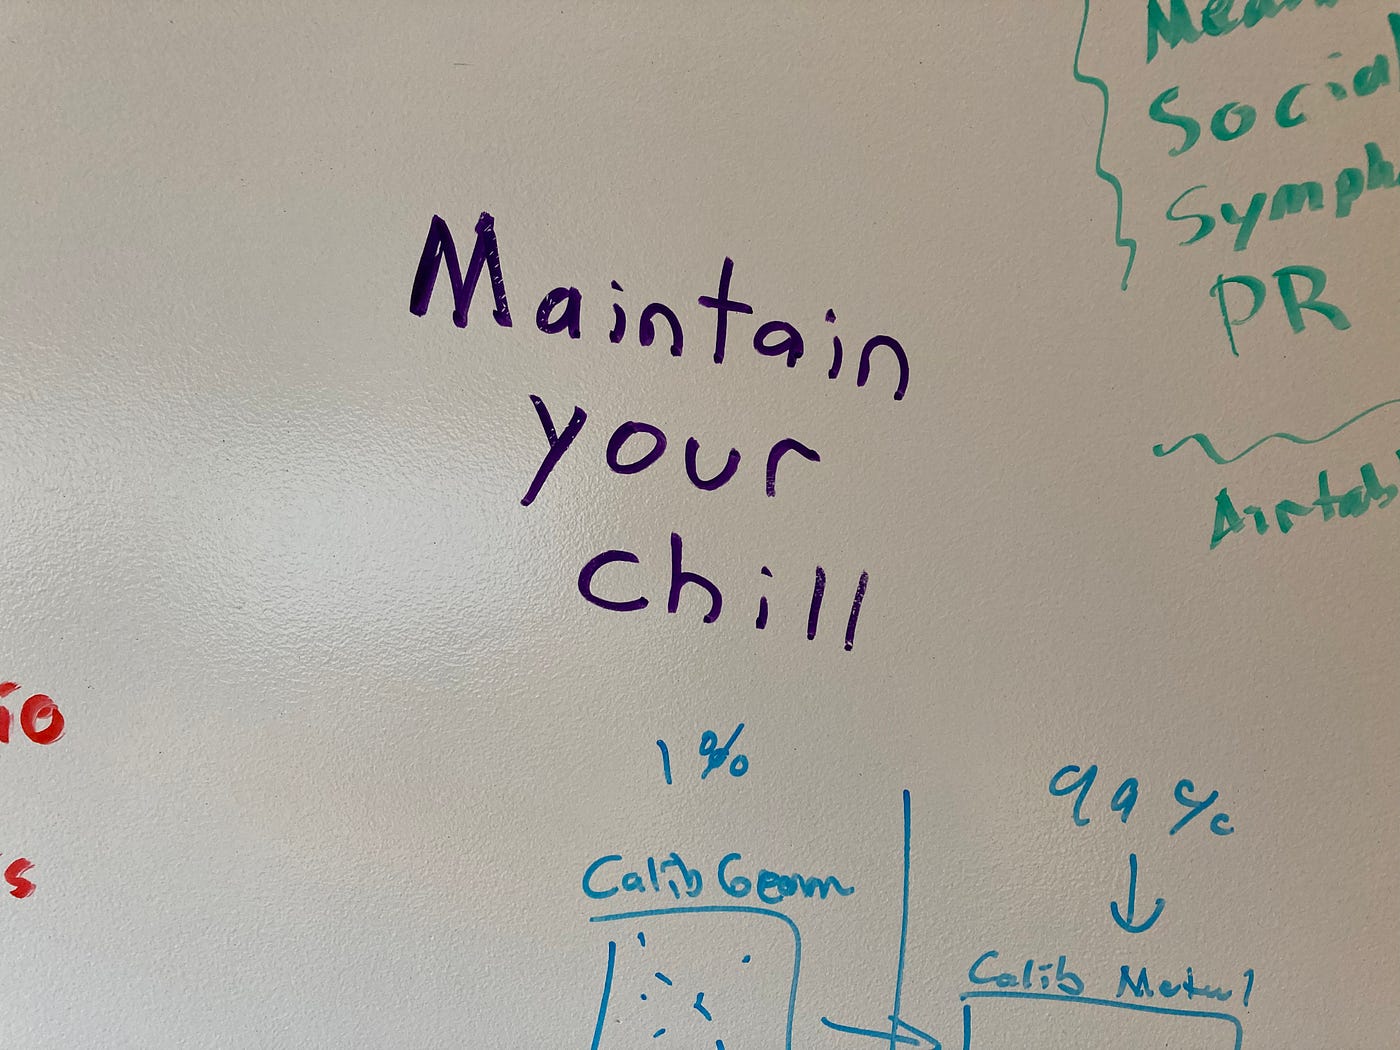 Maintain your chill